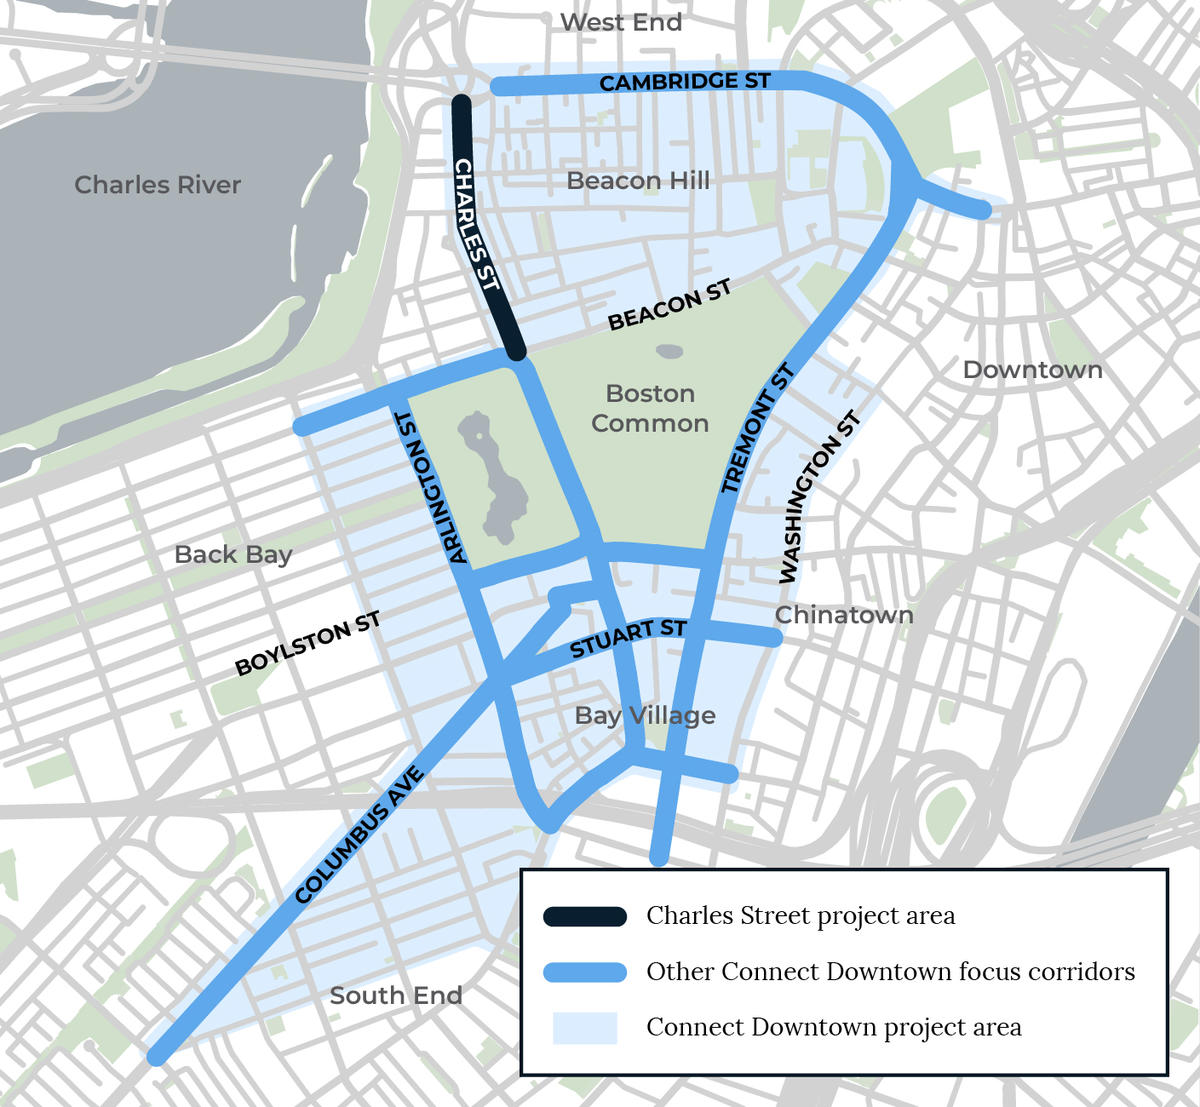 Image shows a map of downtown Boston with streets highlighted in light blue, and Charles Street between Charles Circle and Beacon Street highlighted in dark blue as the focus of this project.